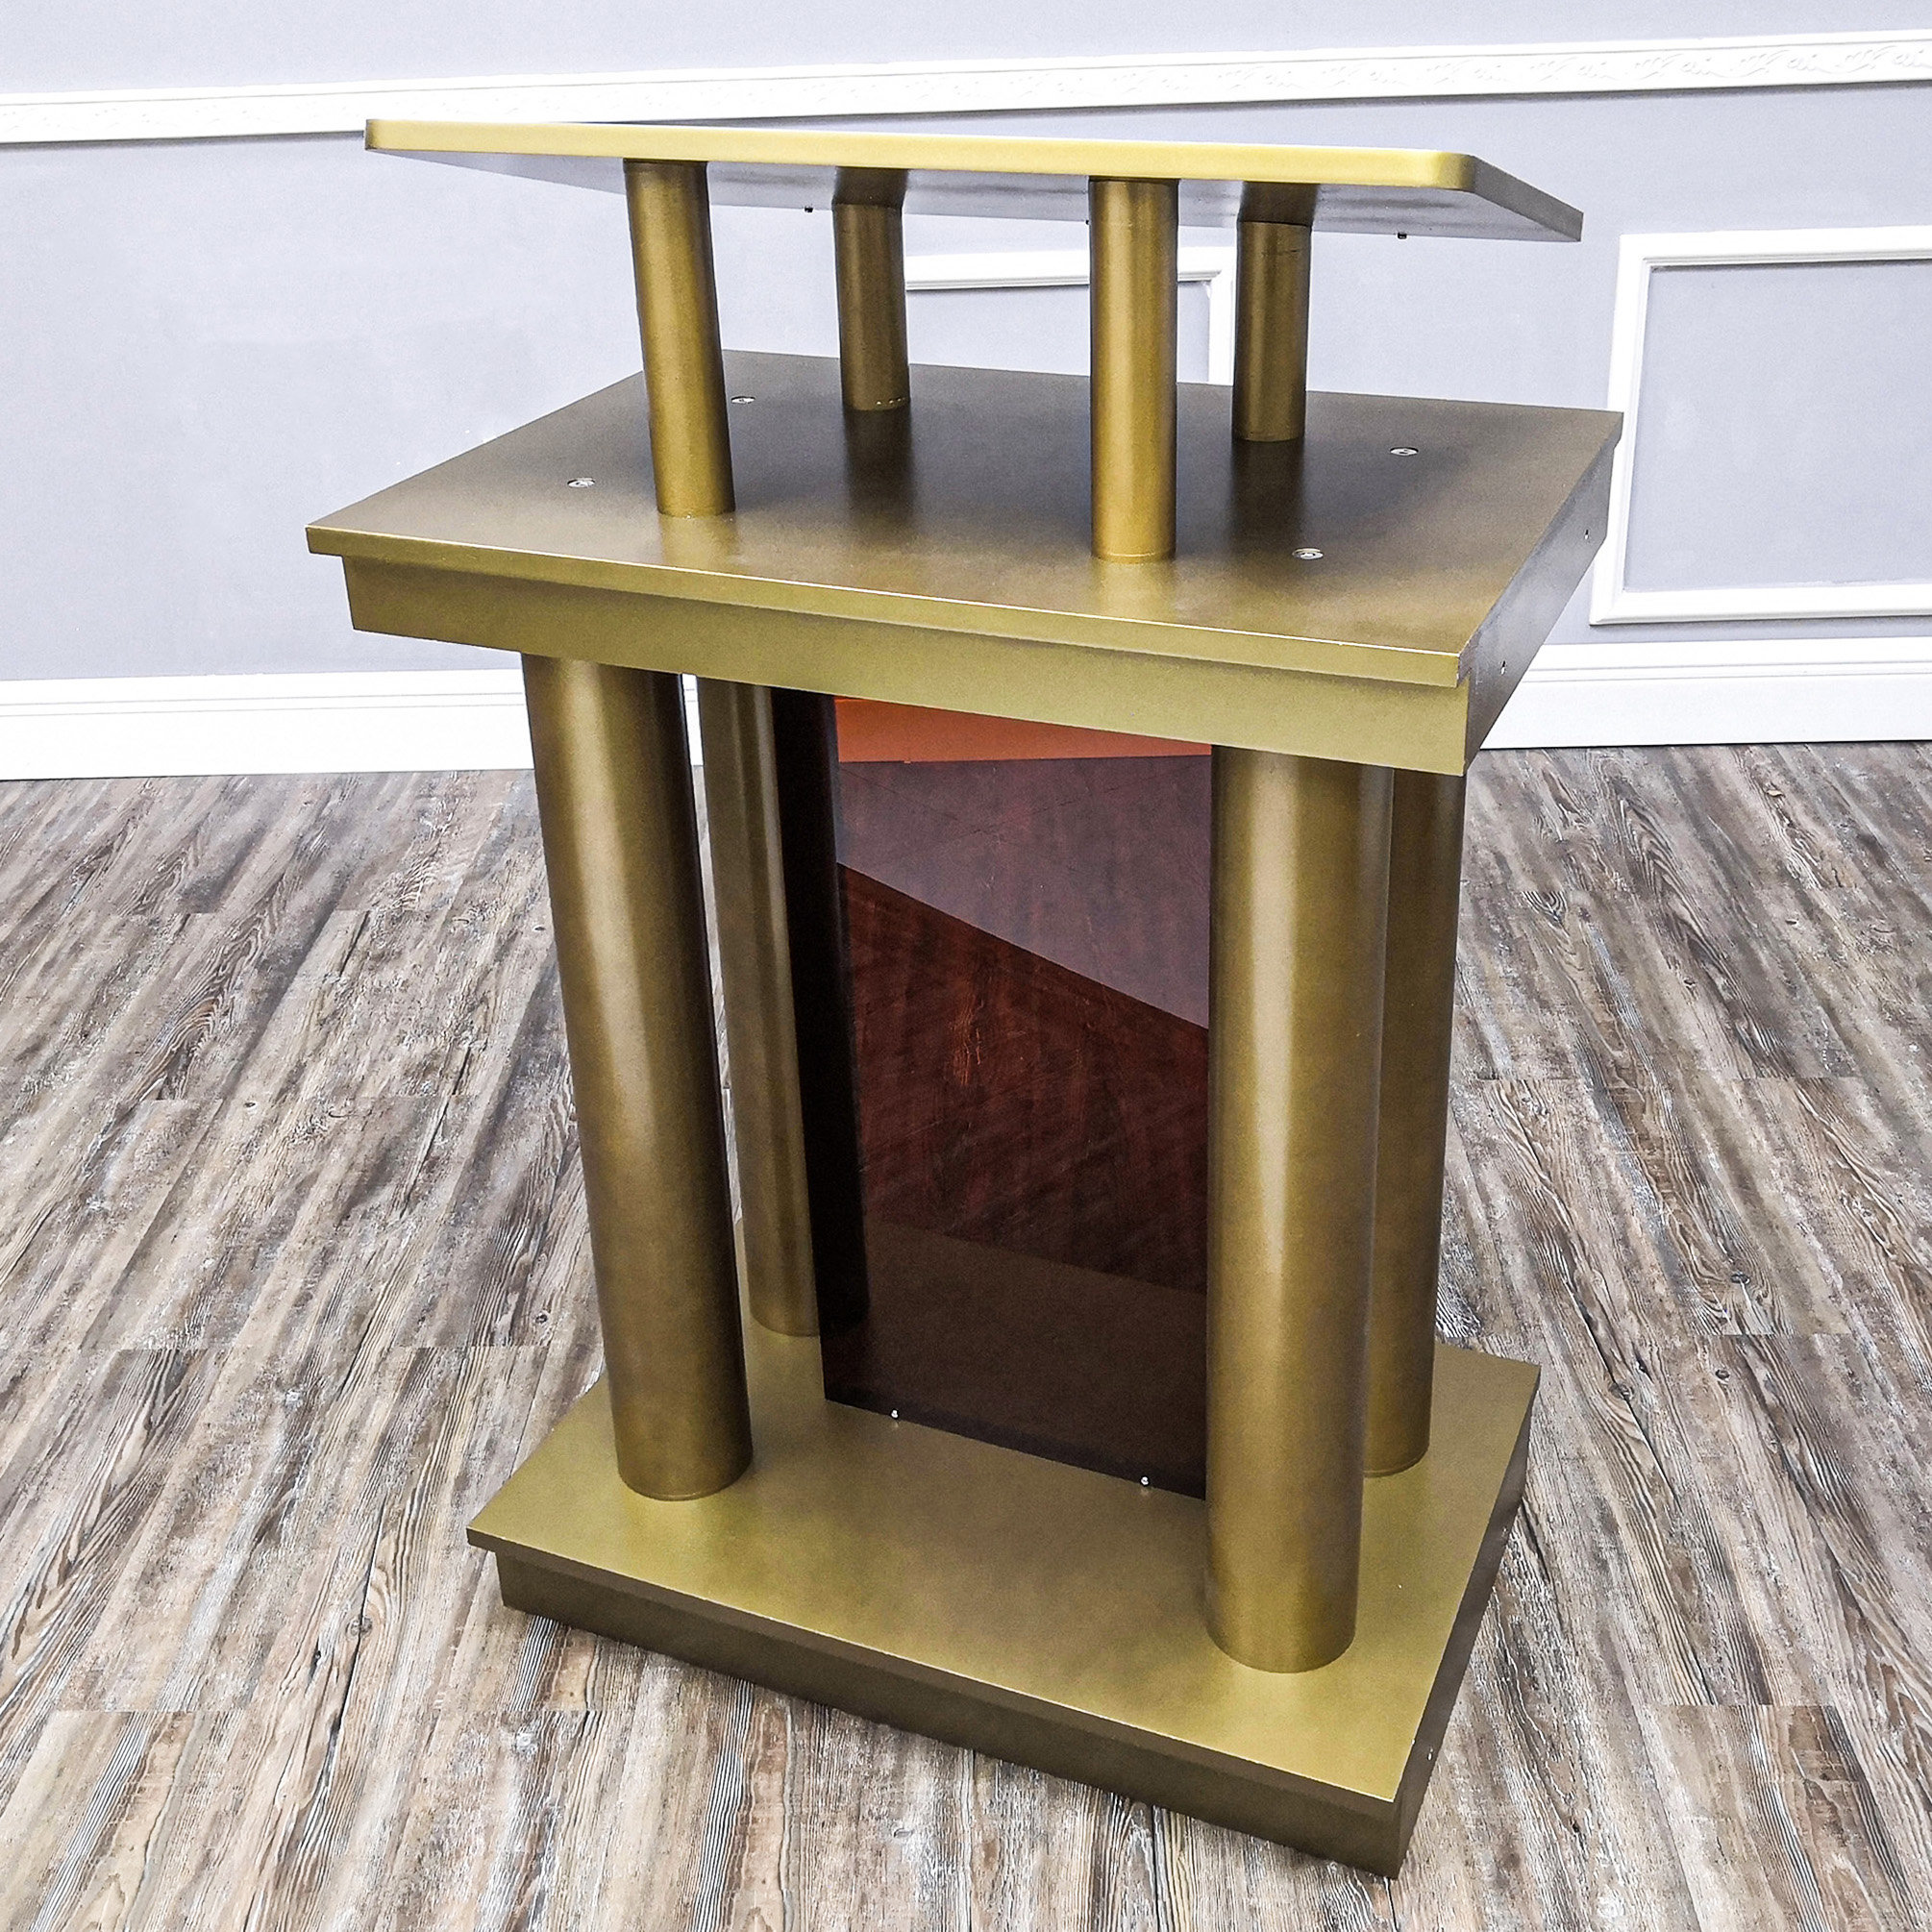 FixtureDisplays Deluxe Podium Floor Standing Lectern Church Pulpit w/Elevated Reading Surface 14315-GOLD